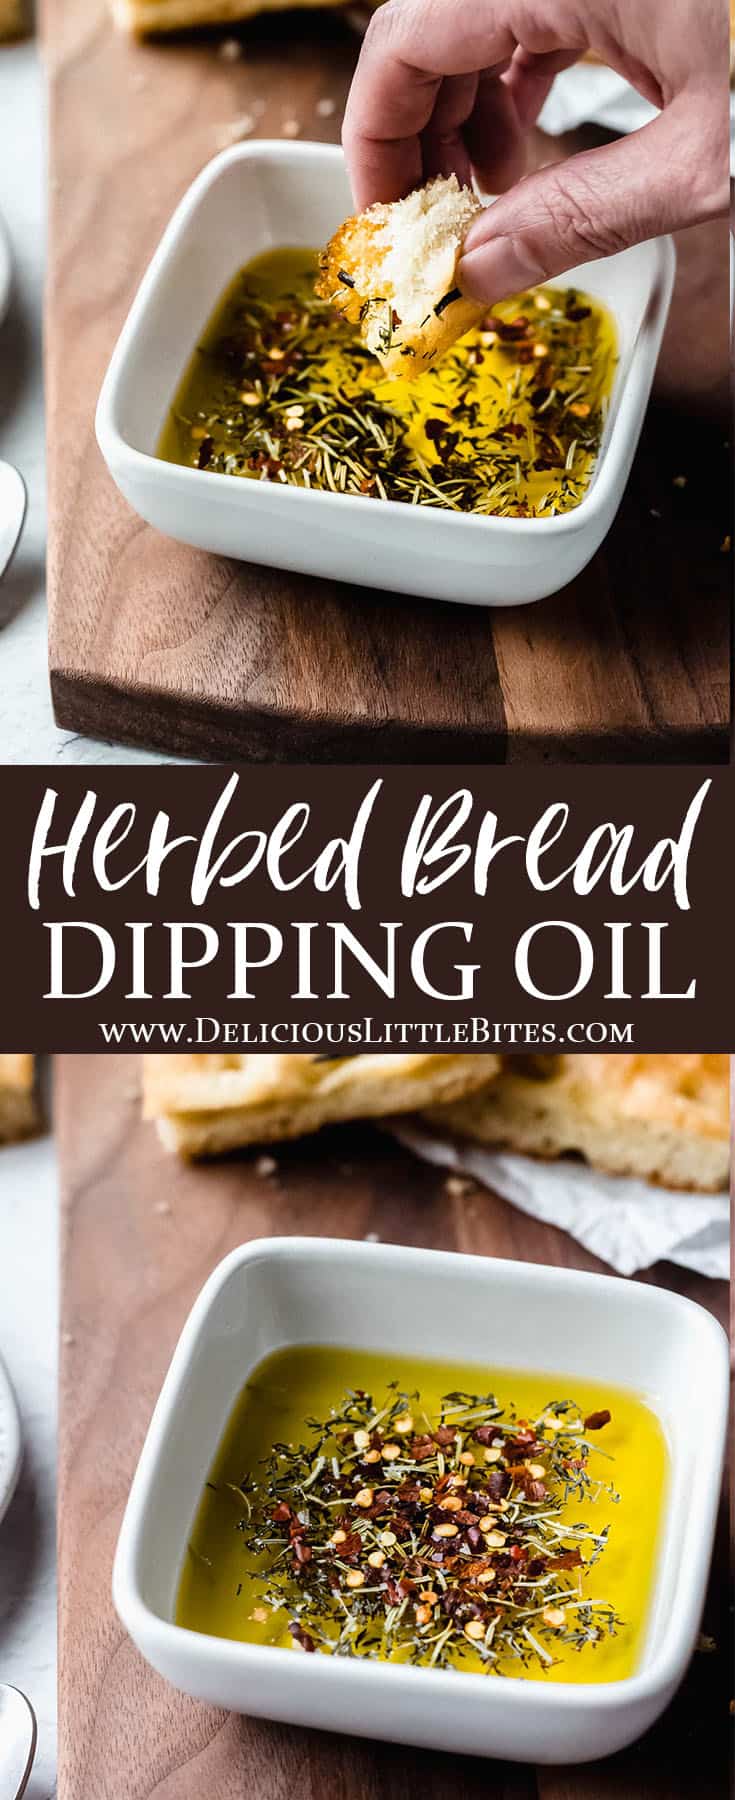 Bread Dipping Oil (with Herbs) - Delicious Little Bites